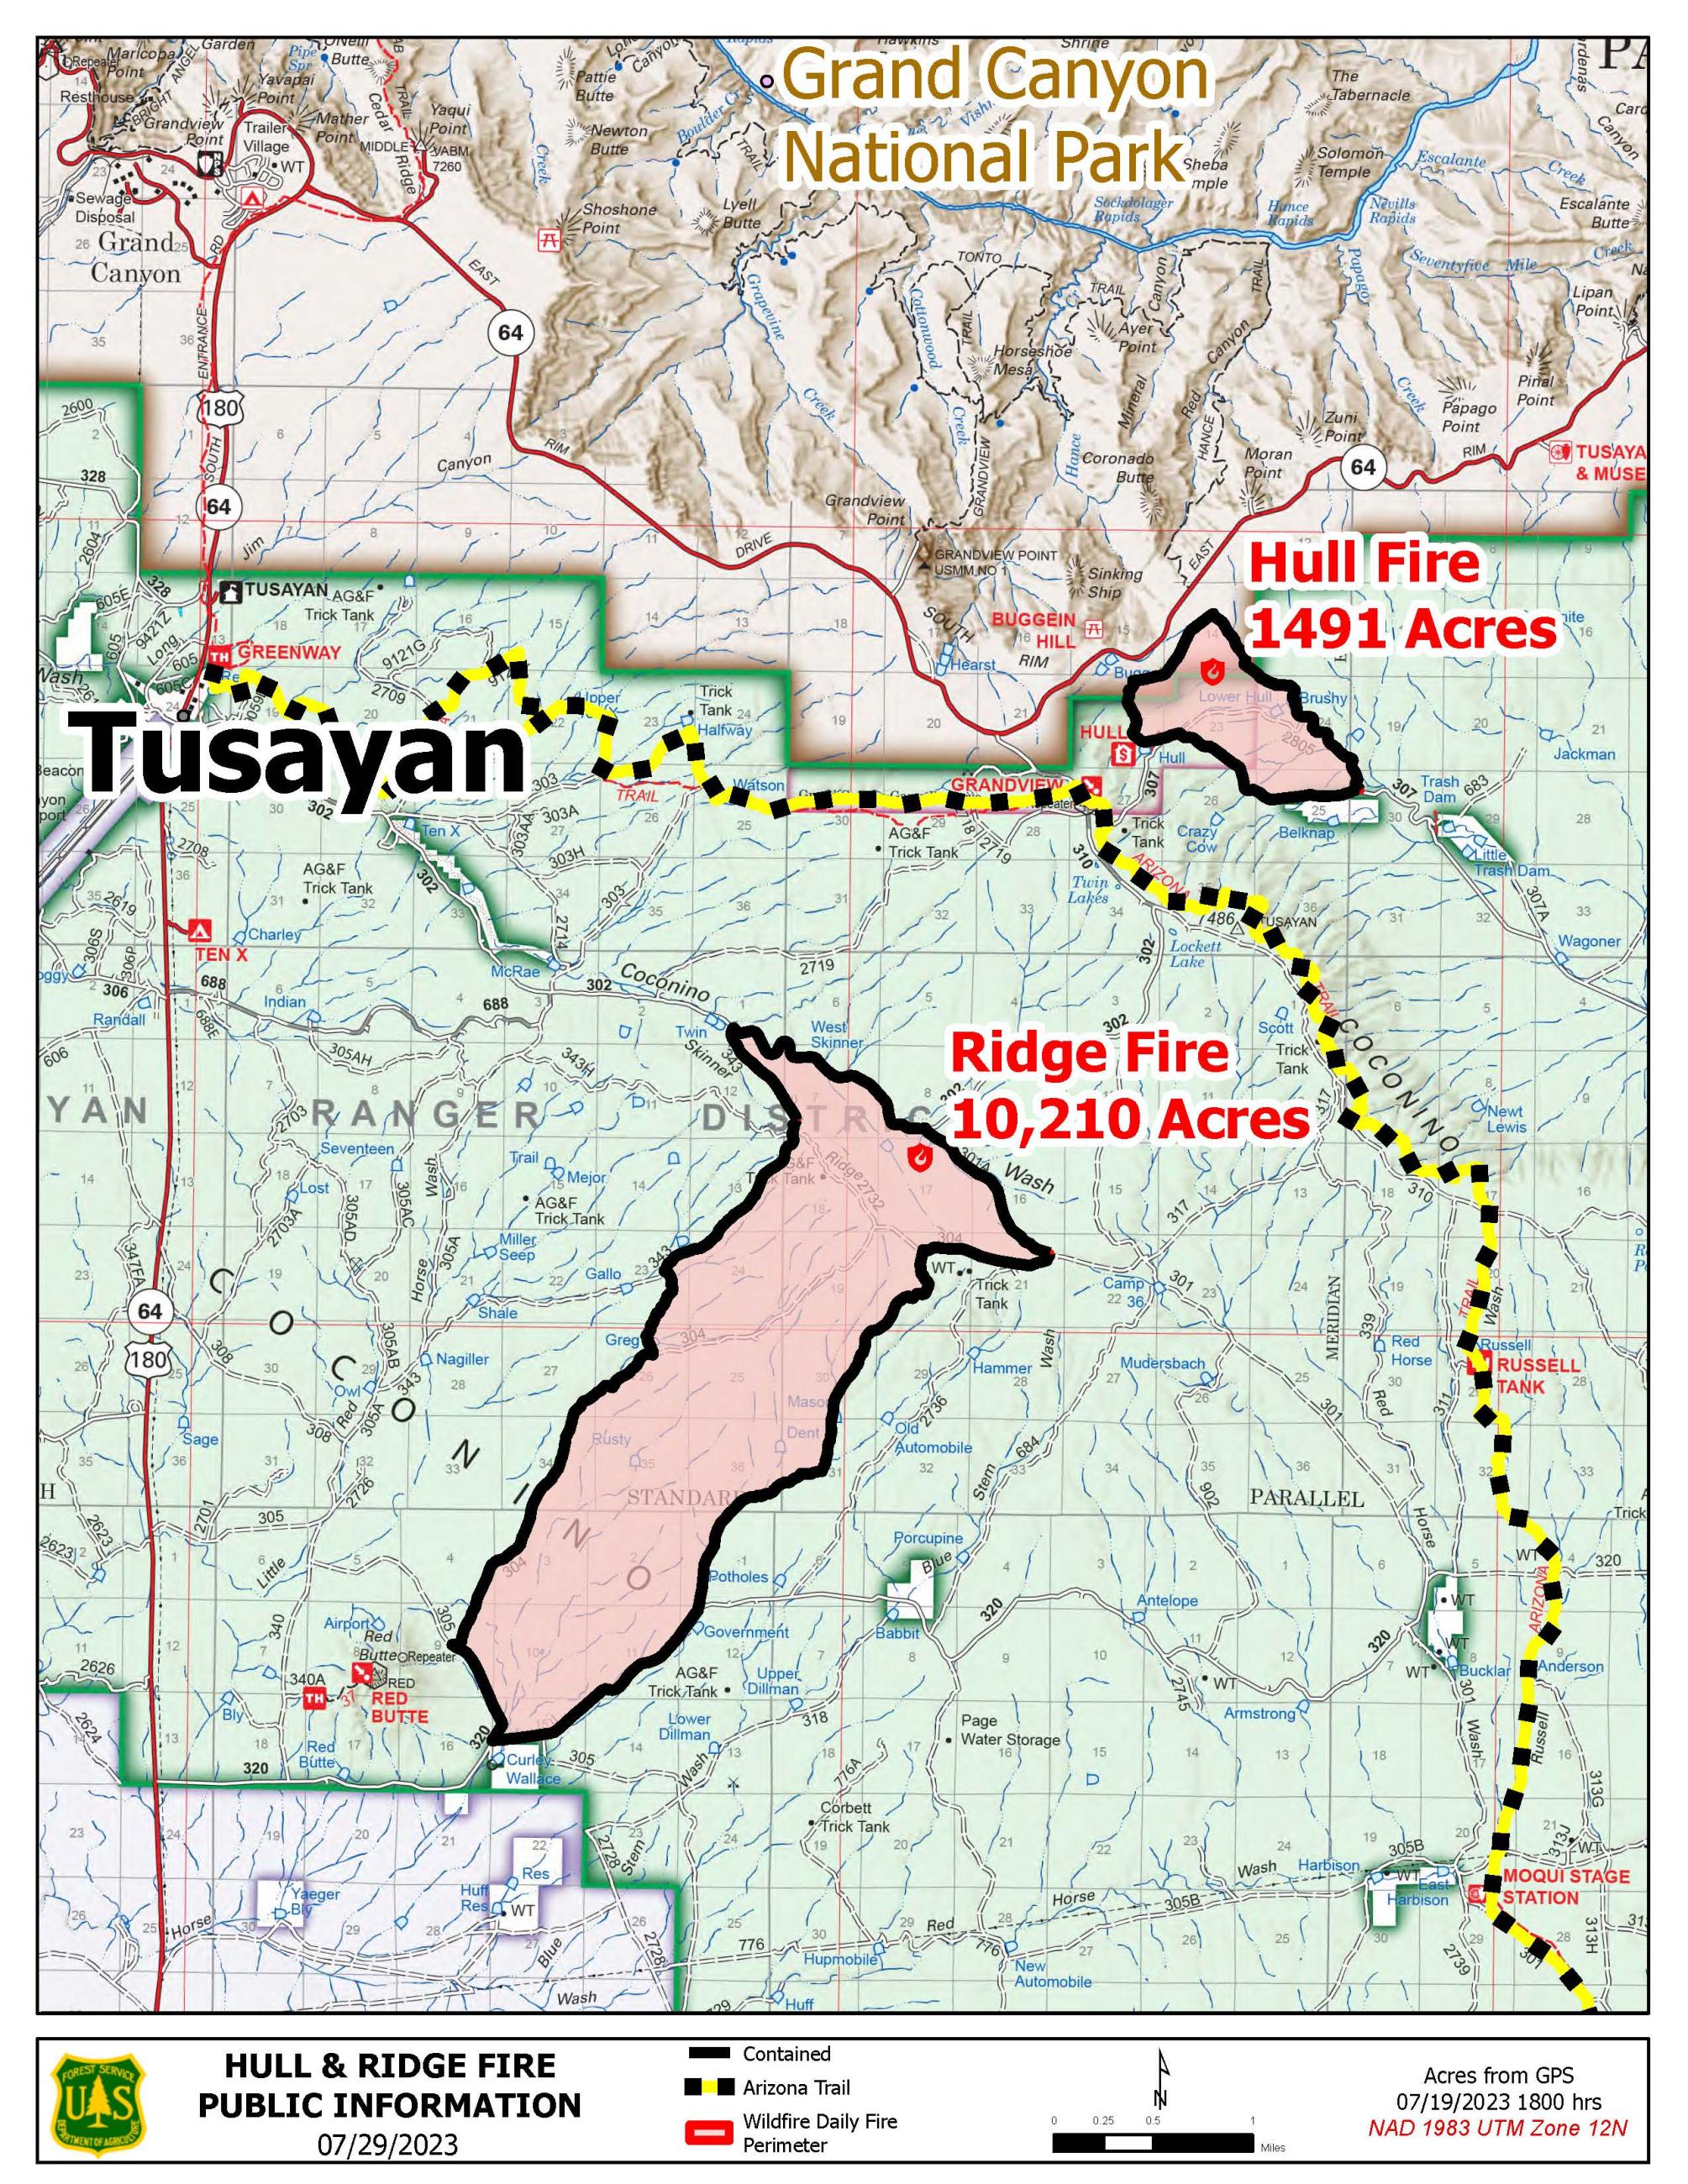 Map for the Ridge Fire area as of 7/31.